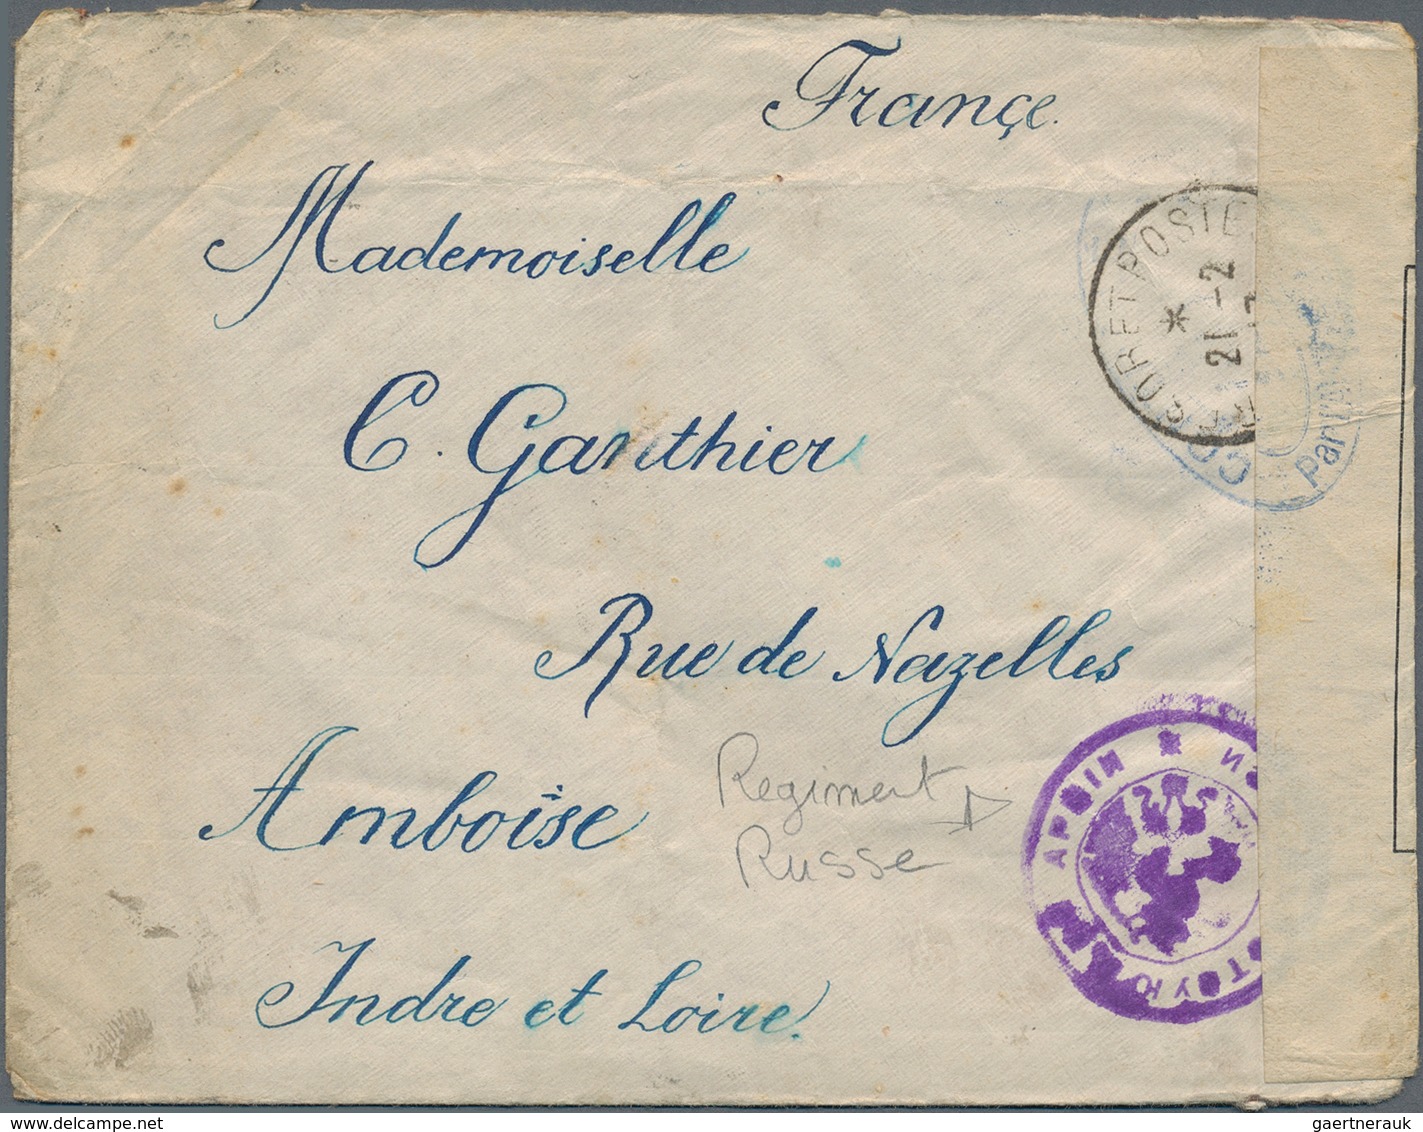 Frankreich: 1914/1921, Holding Of Apprx. 2000+ Field Post Covers/fronts + Related, Showing A Vast Ra - Verzamelingen